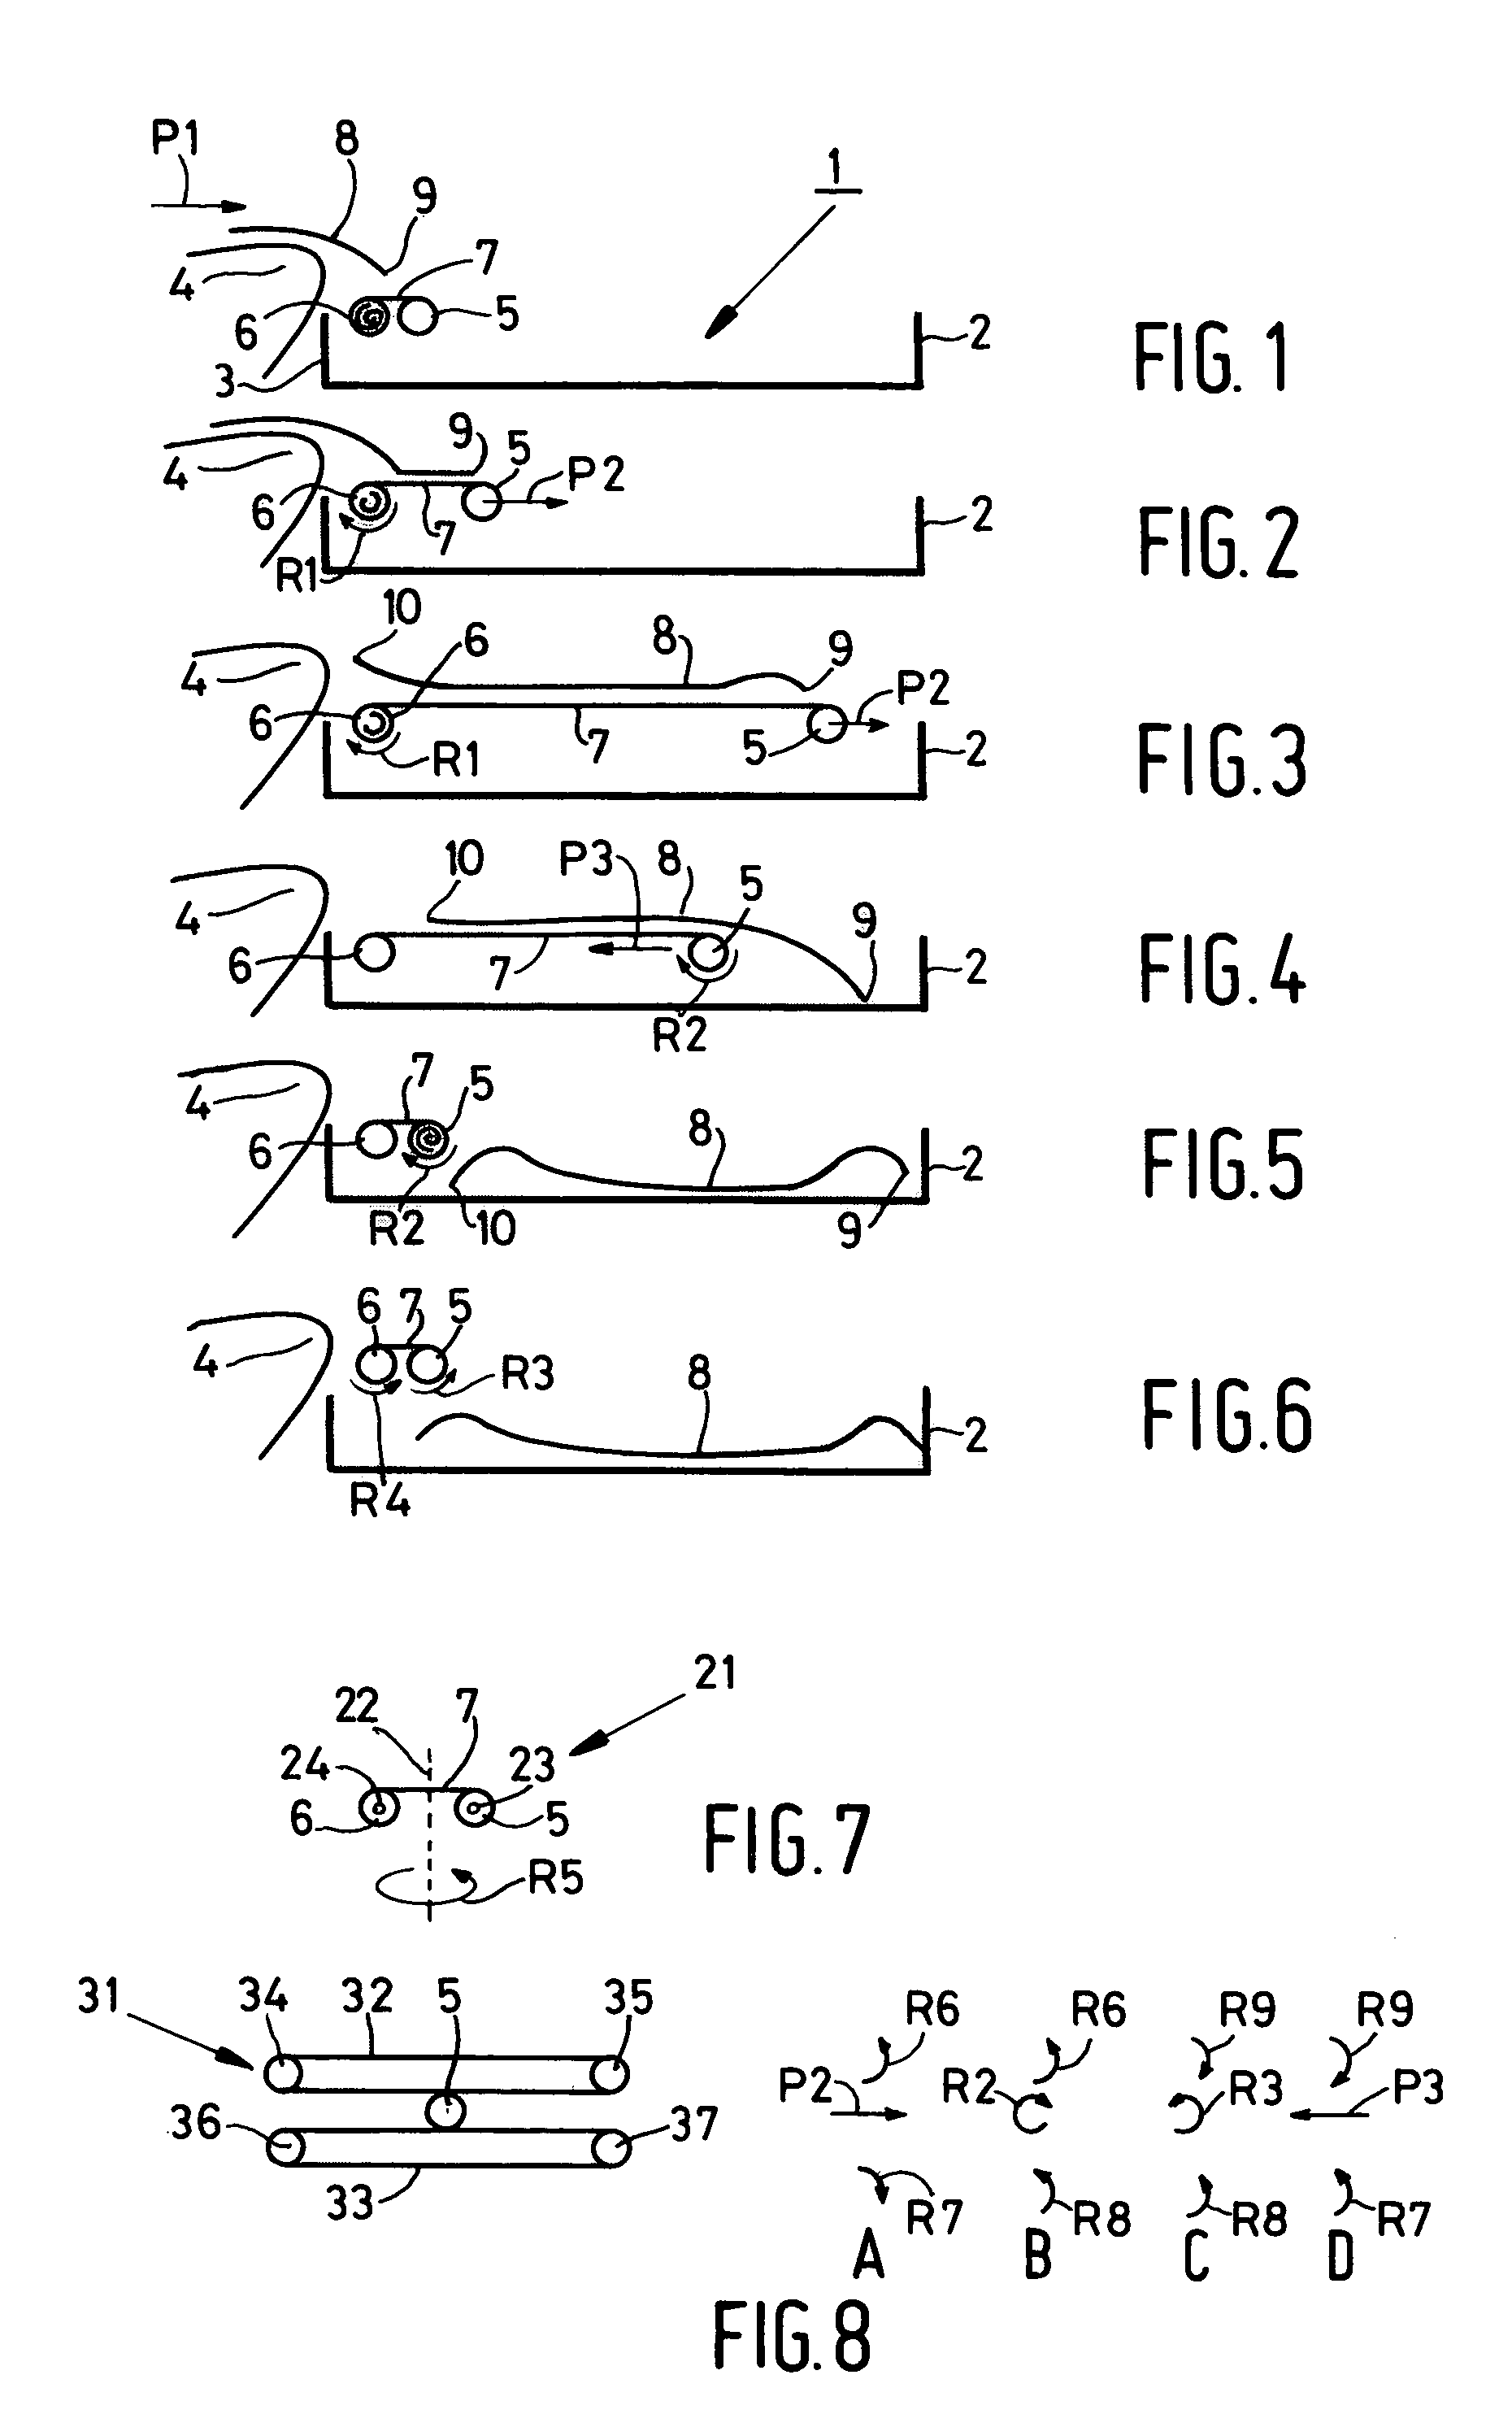 Transporting device for depositing sheet material onto a tray, a printer provided with such a device and a method for depositing a sheet material onto a tray